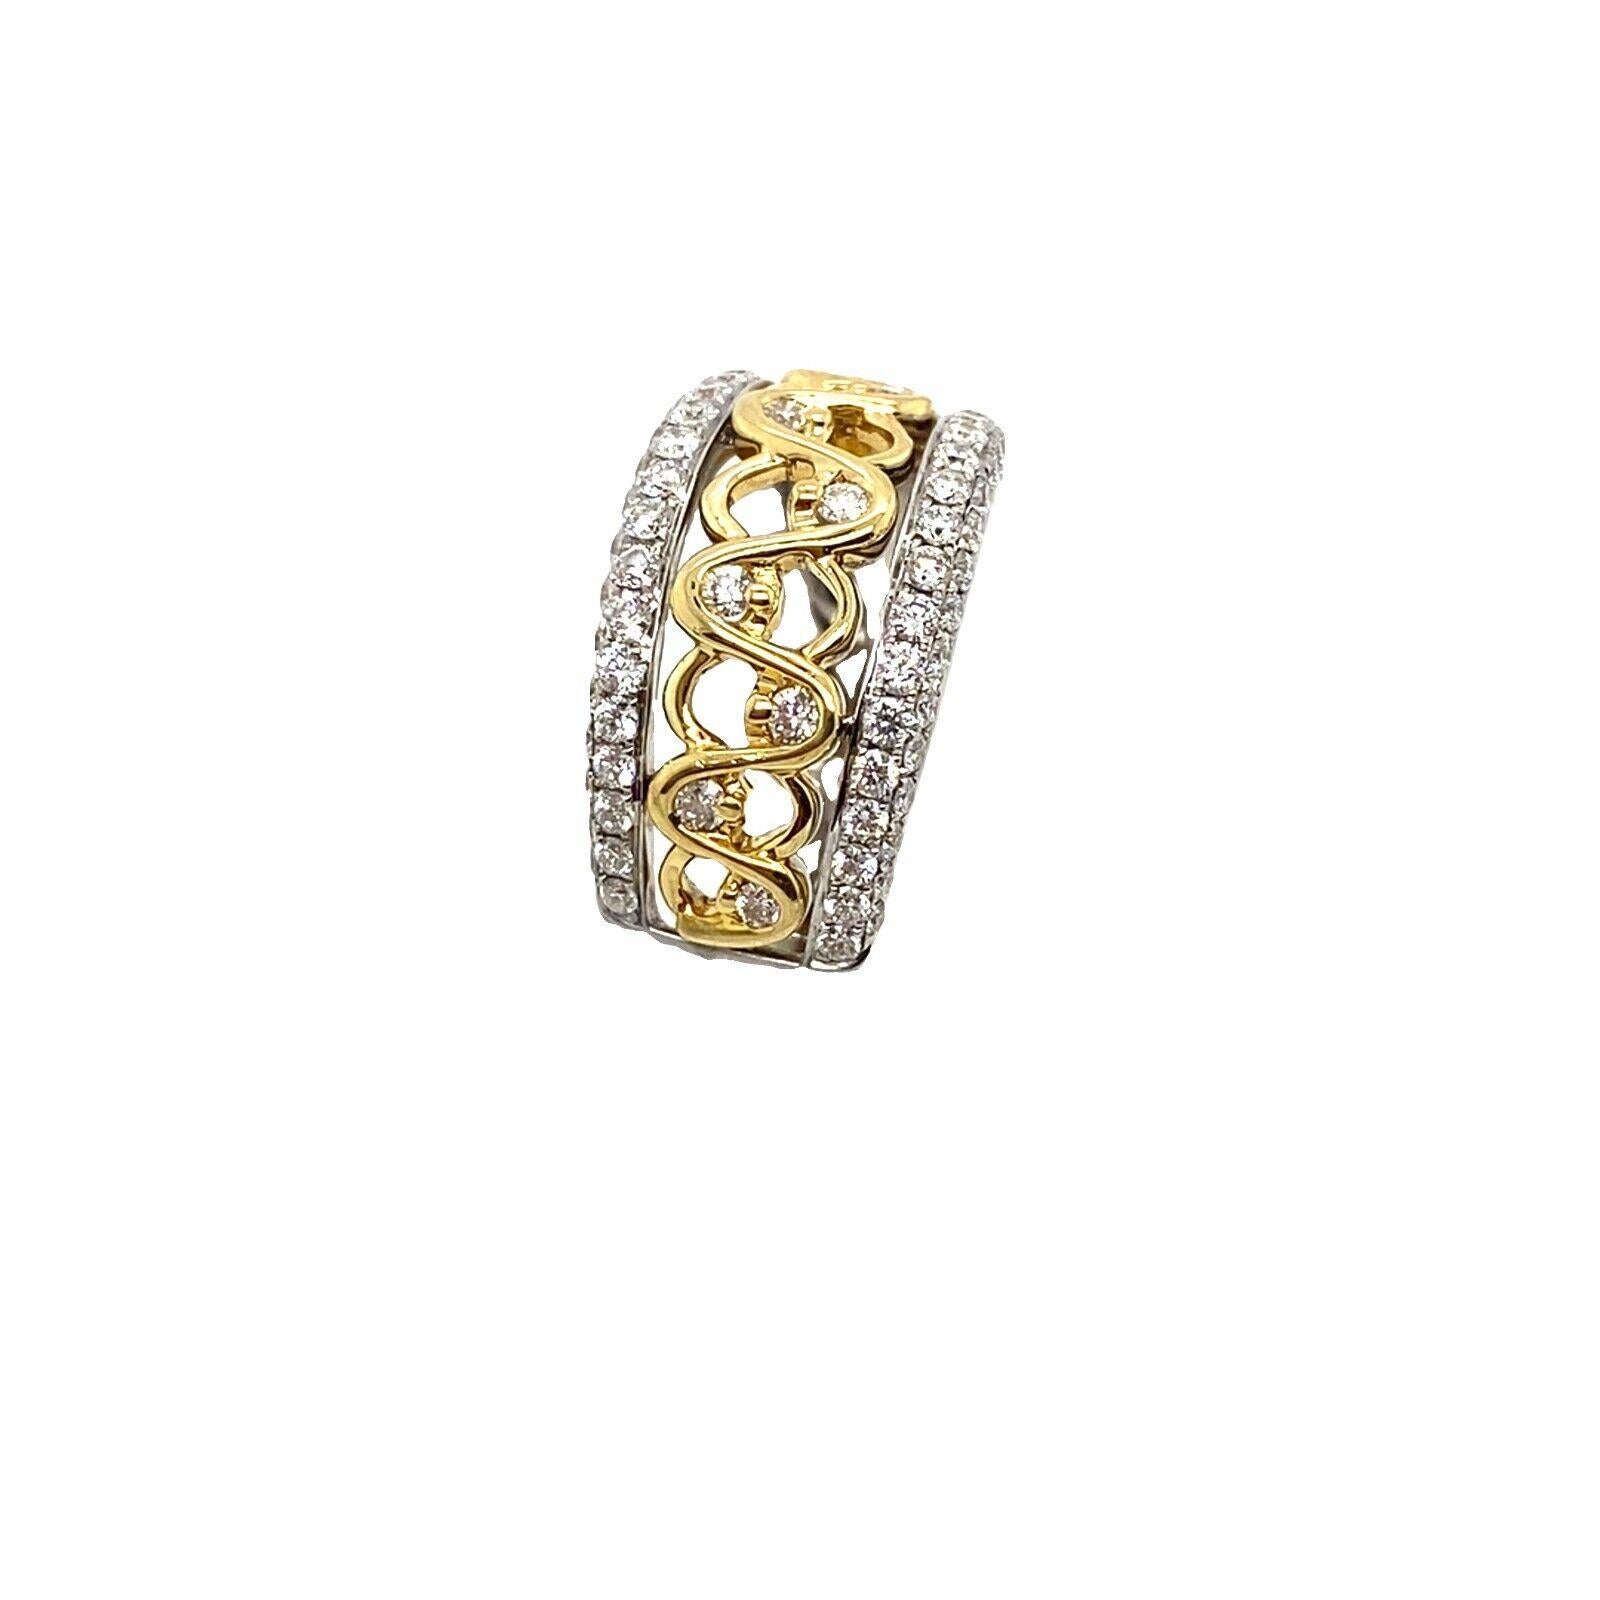 This gorgeous dress ring set is a perfect choice for those who love to shine. The ring set features a 1.30ct Diamond in total, with high polished edges in 18ct Yellow Gold & White Gold with matt finish.
This ring is elegant and